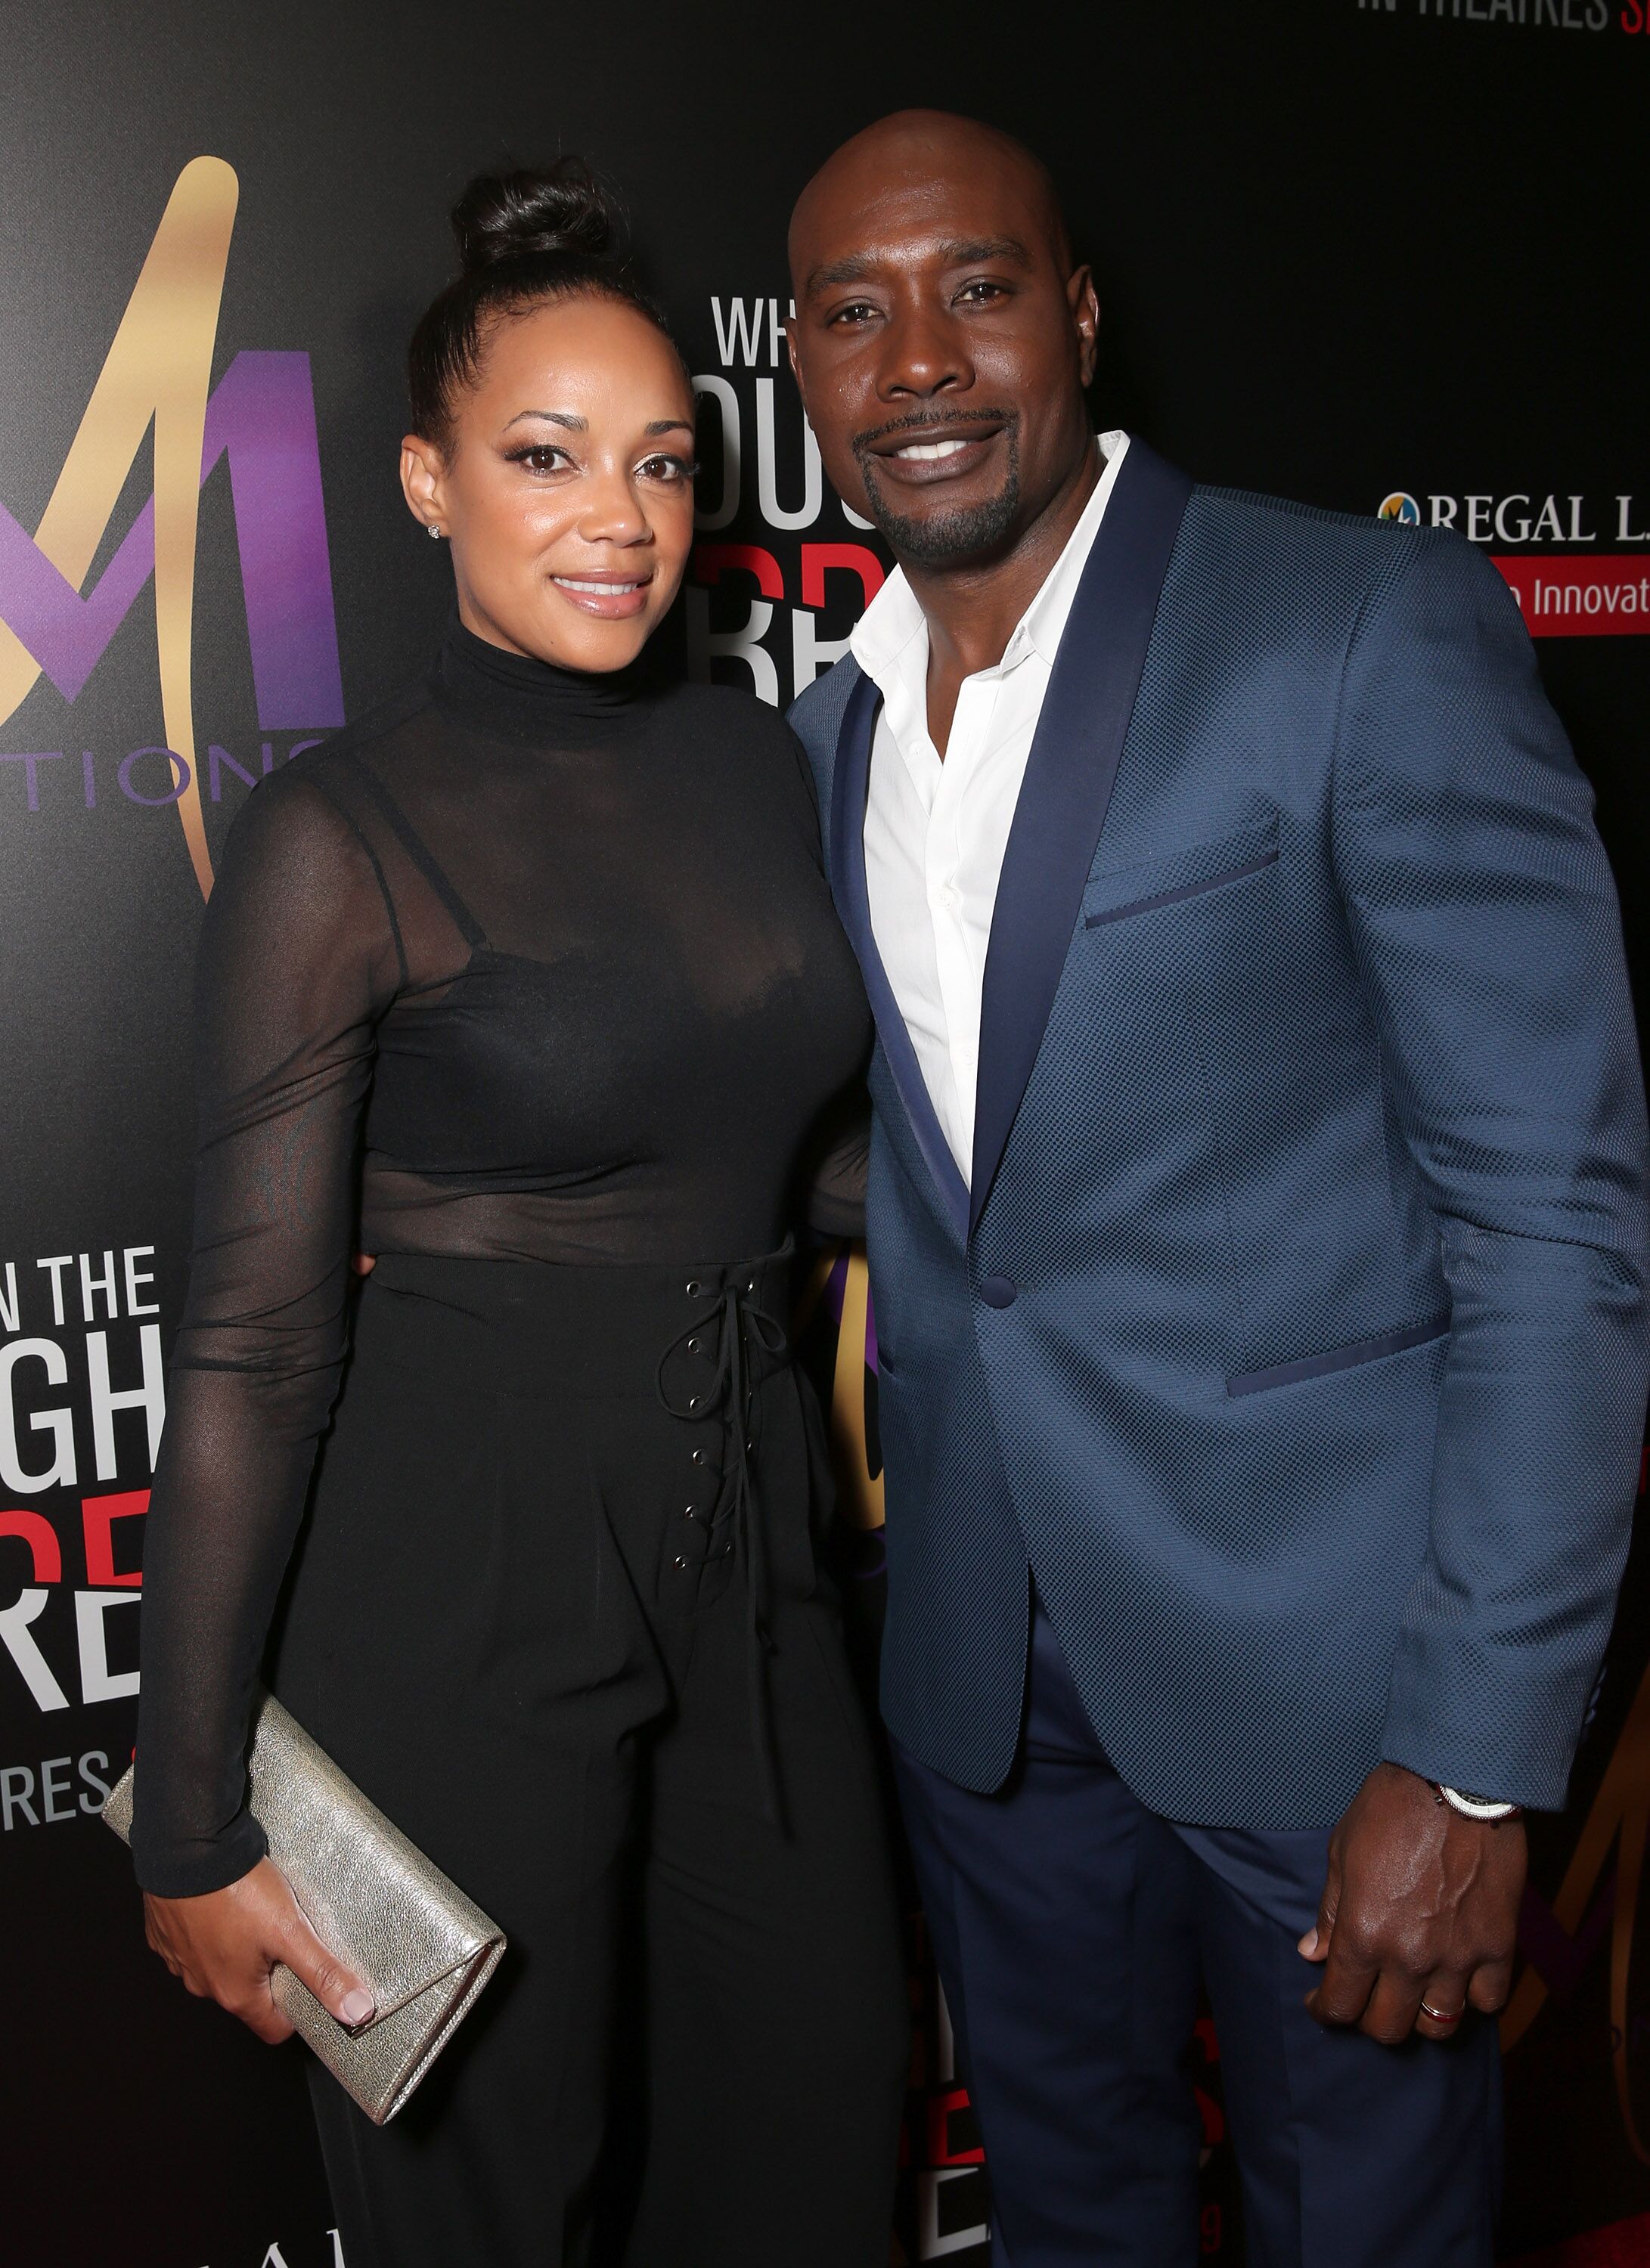 Morris Chestnut Once Opened Up About Surprise Party He Threw For